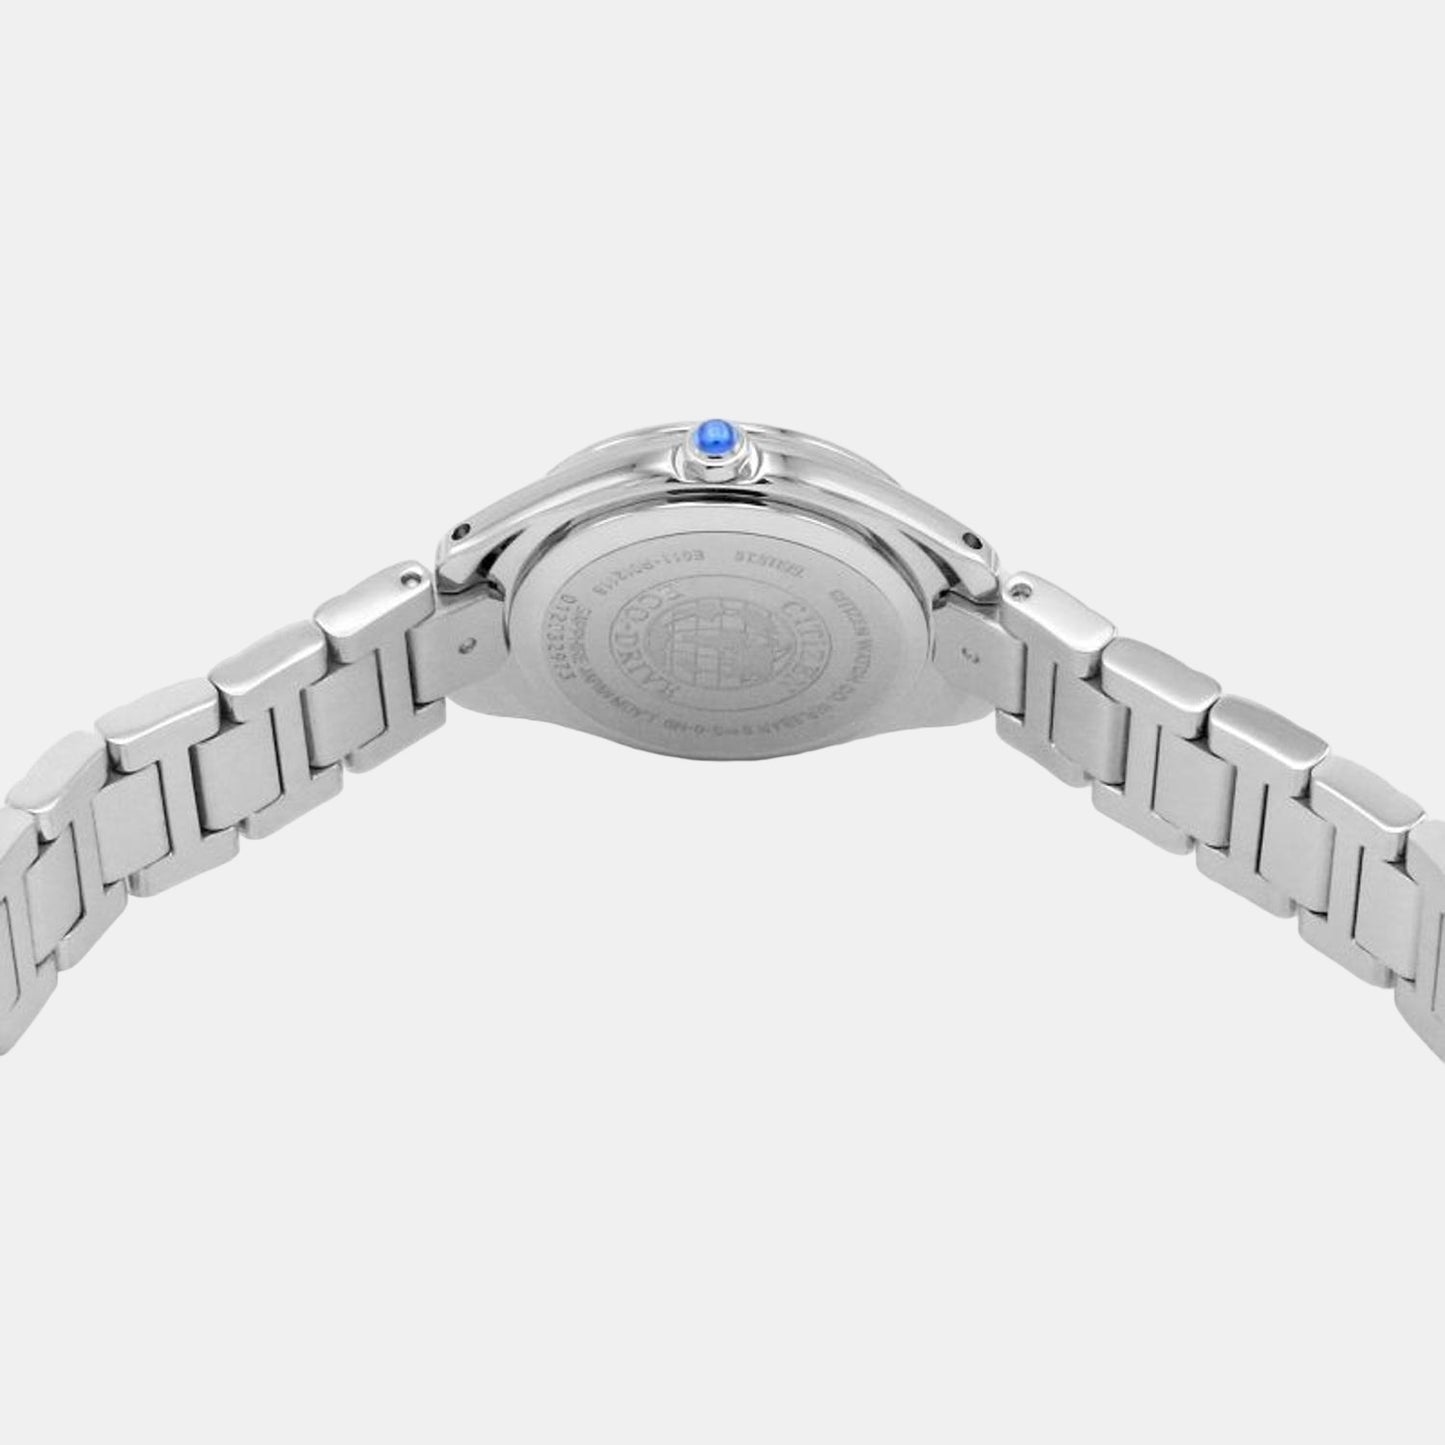 citizen-stainless-steel-white-analog-female-watch-ew2540-83a